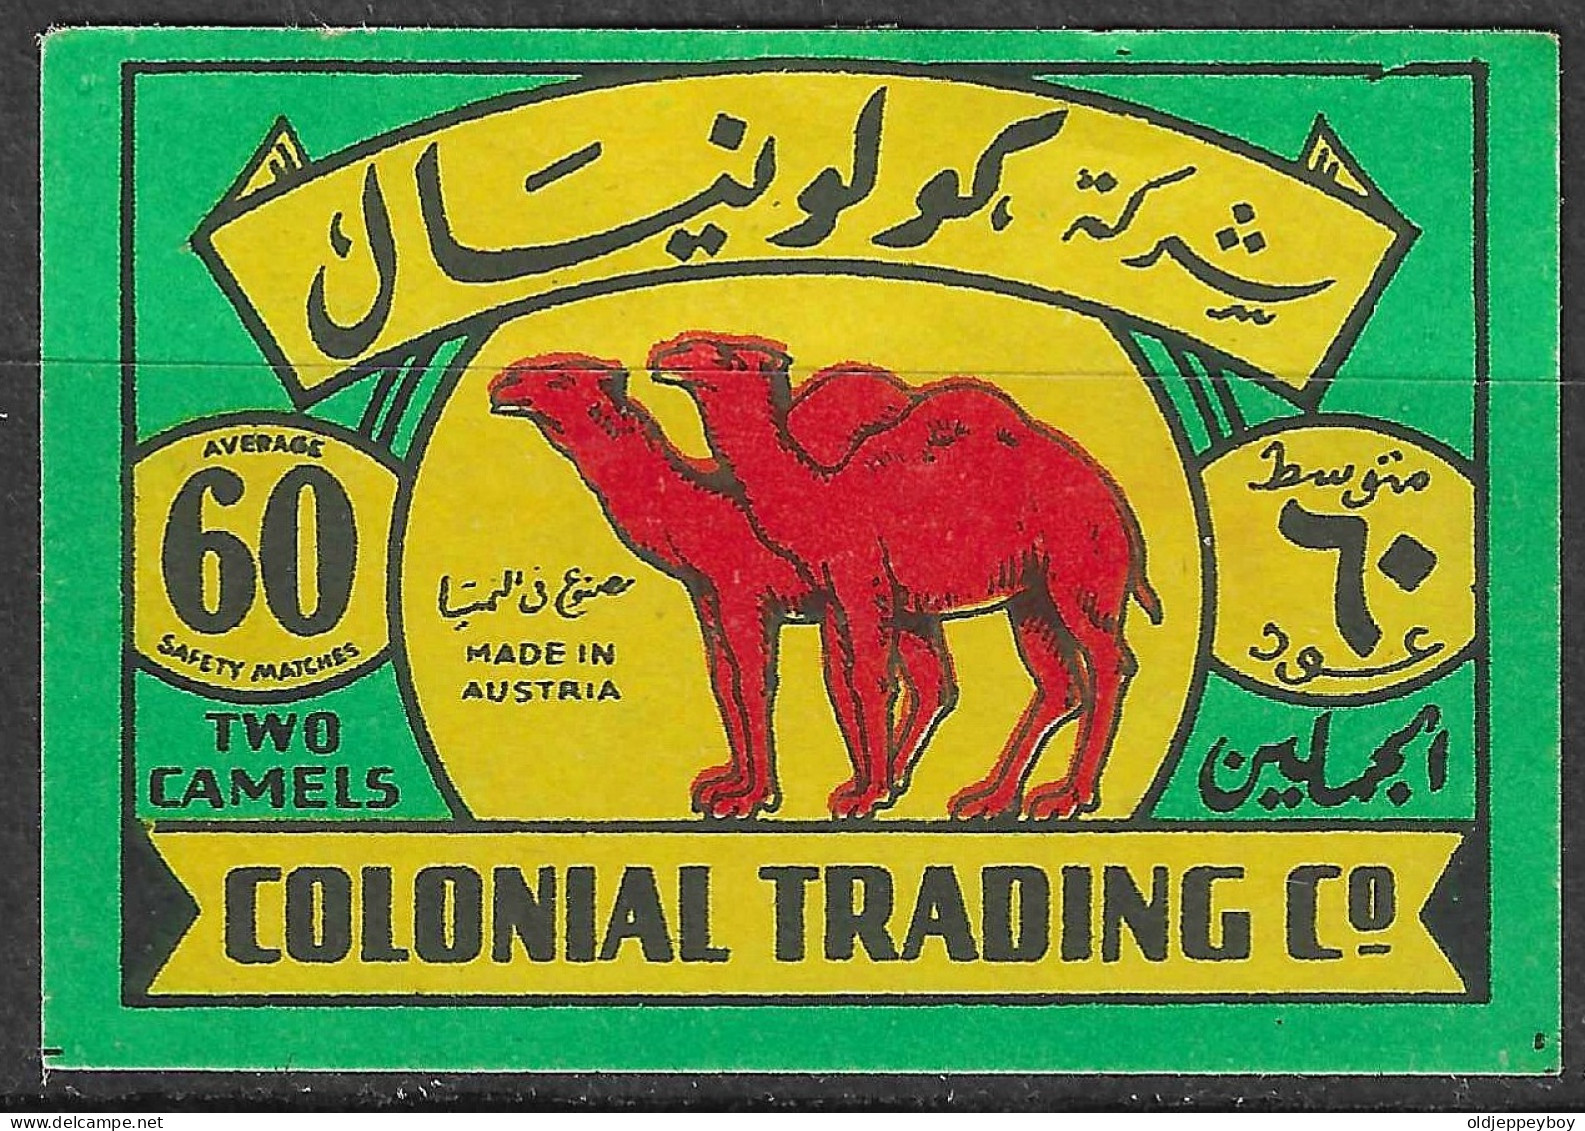  Phillumeny MATCHBOX LABEL Made In Poland, 1950’s/1960’s TWO CAMELS  3.5 X 5 Cm - Boites D'allumettes - Etiquettes